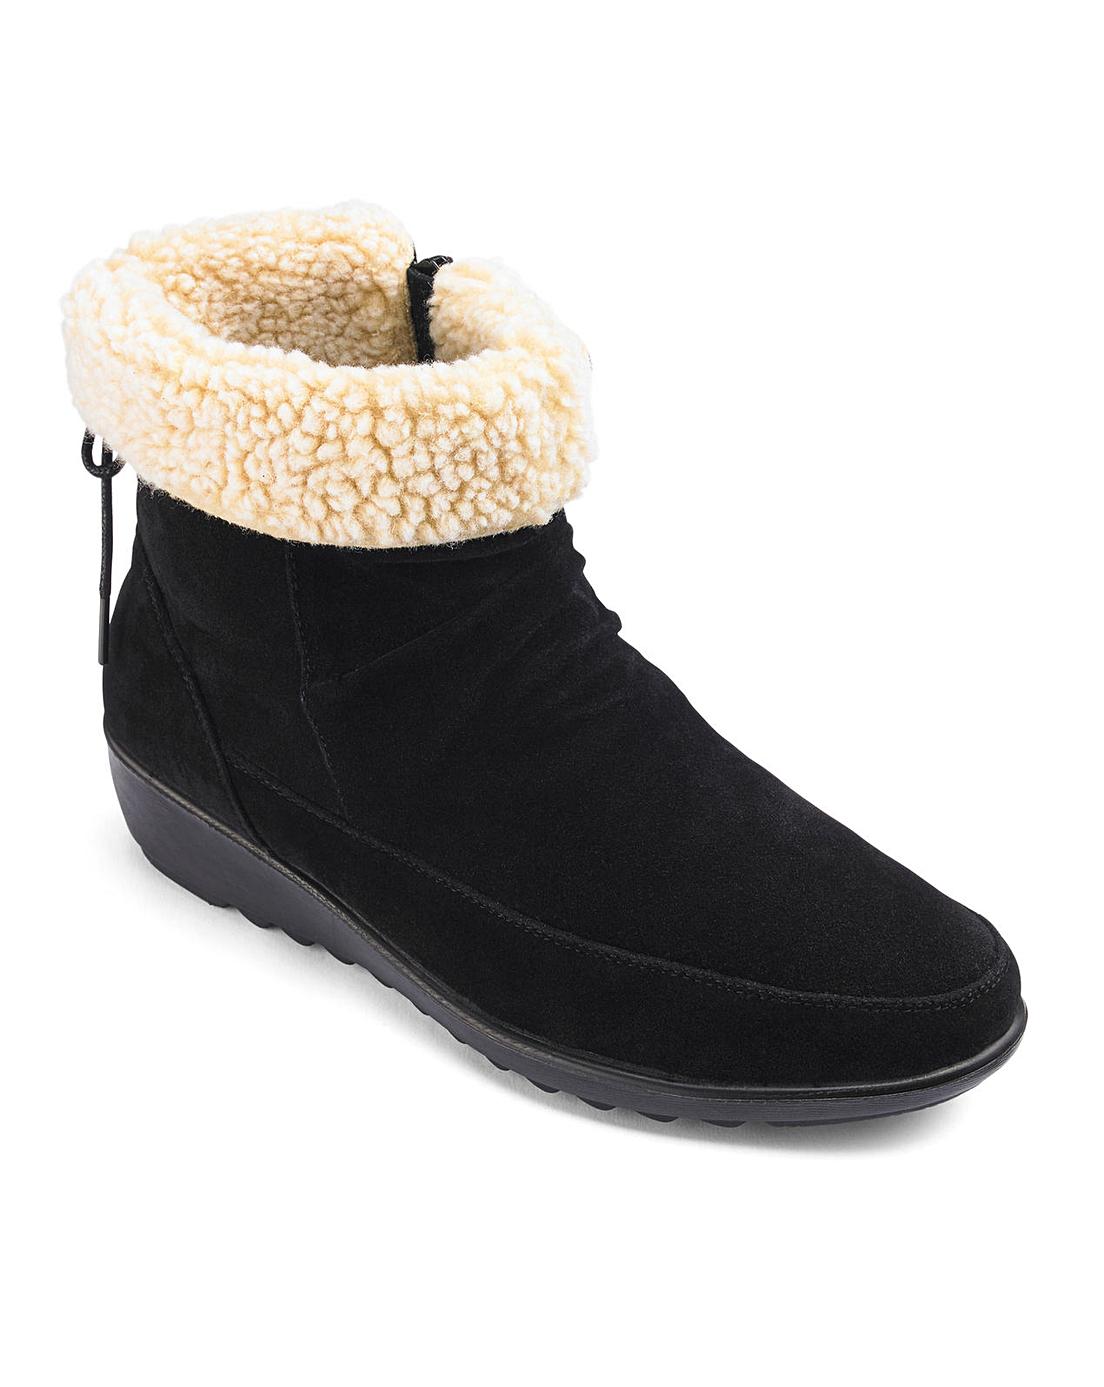 Cushion Walk Ankle Boots E Fit | House of Bath